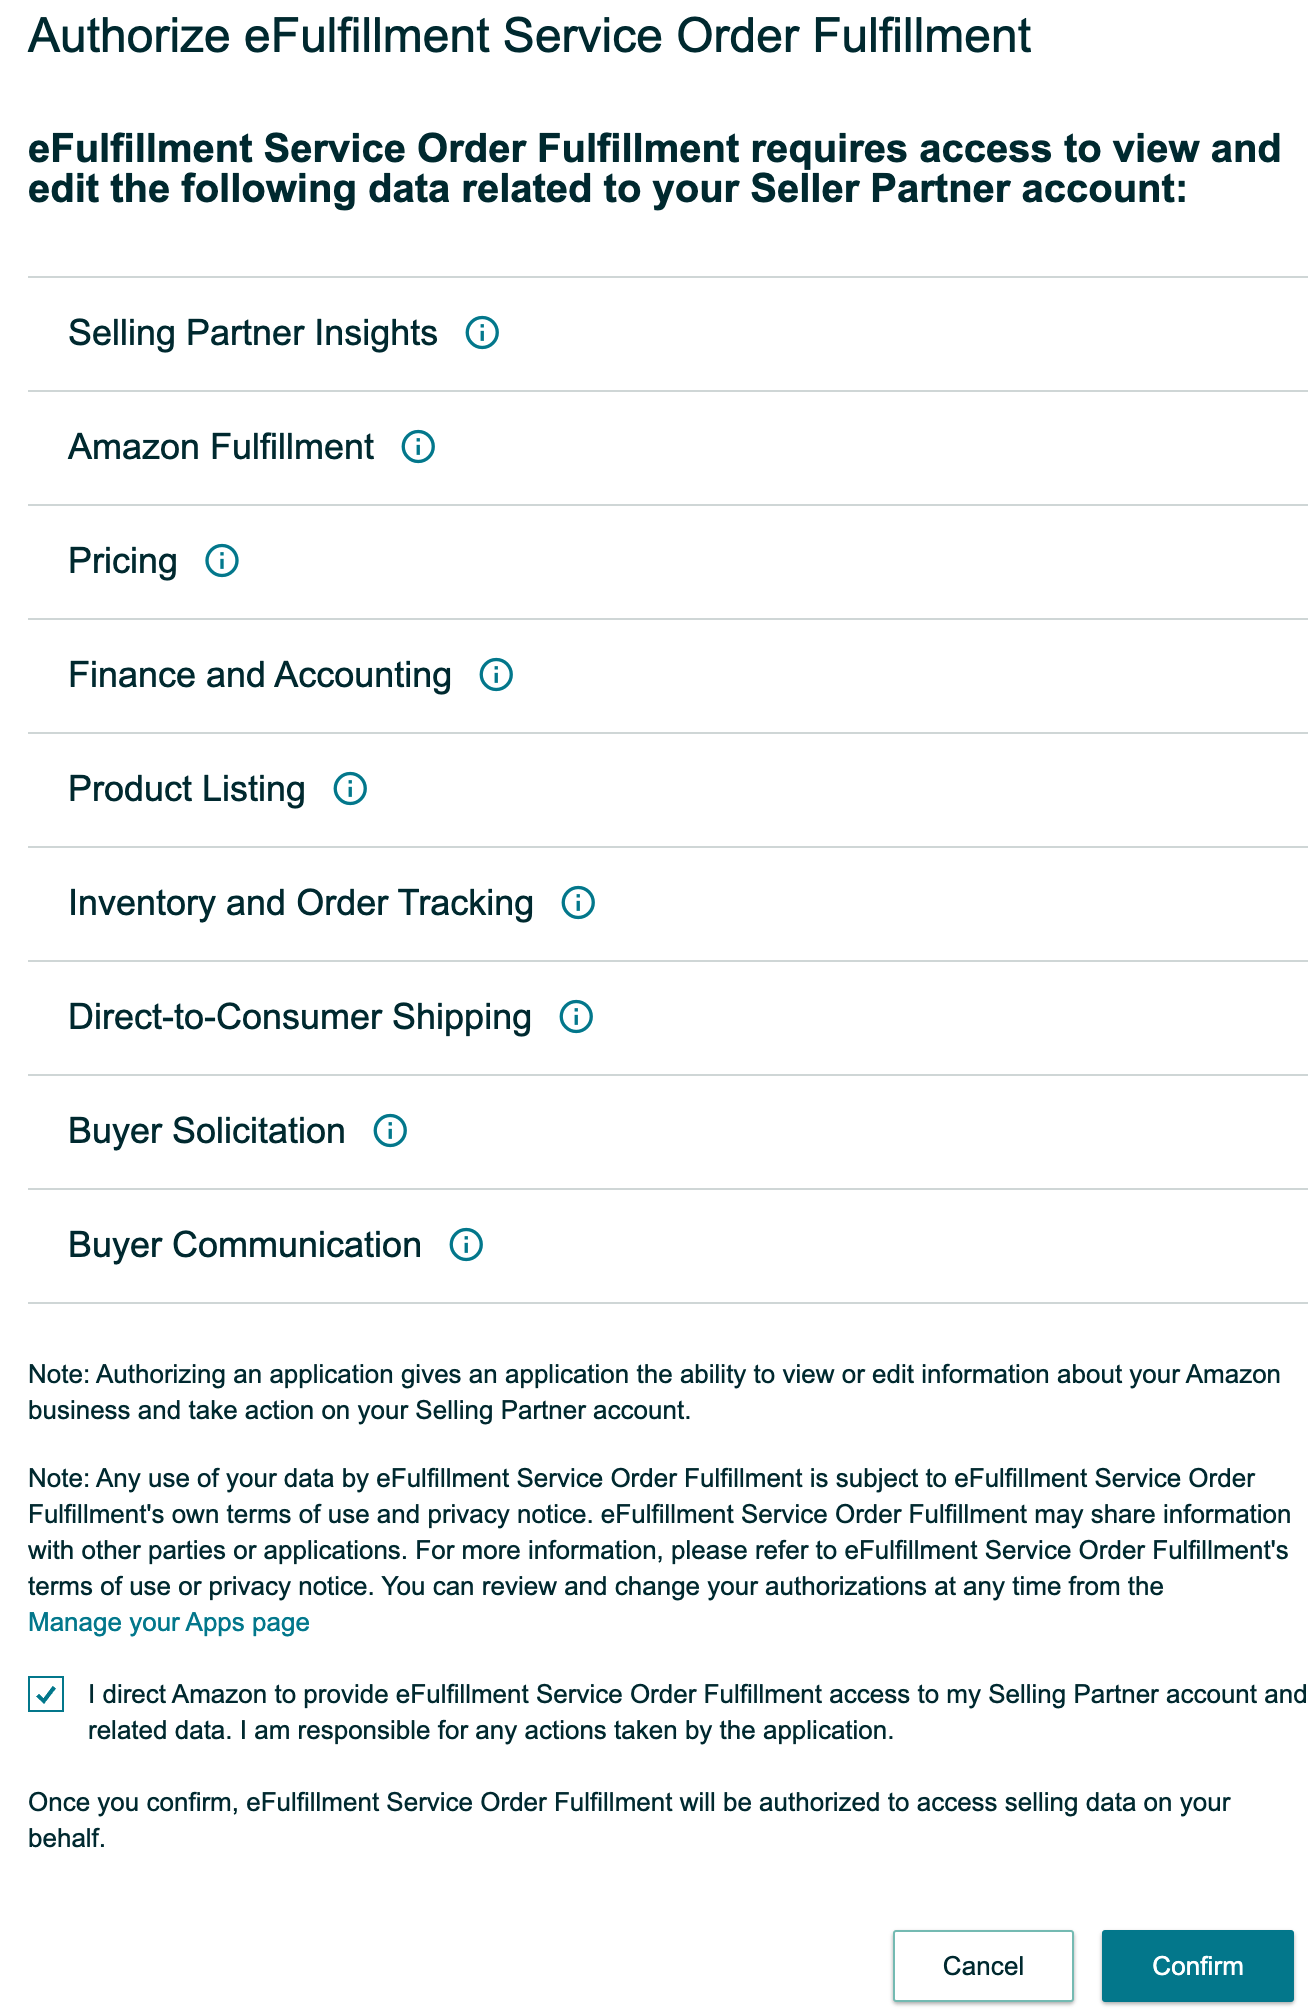 Third_pic_-_authorizing_in_amazon.png